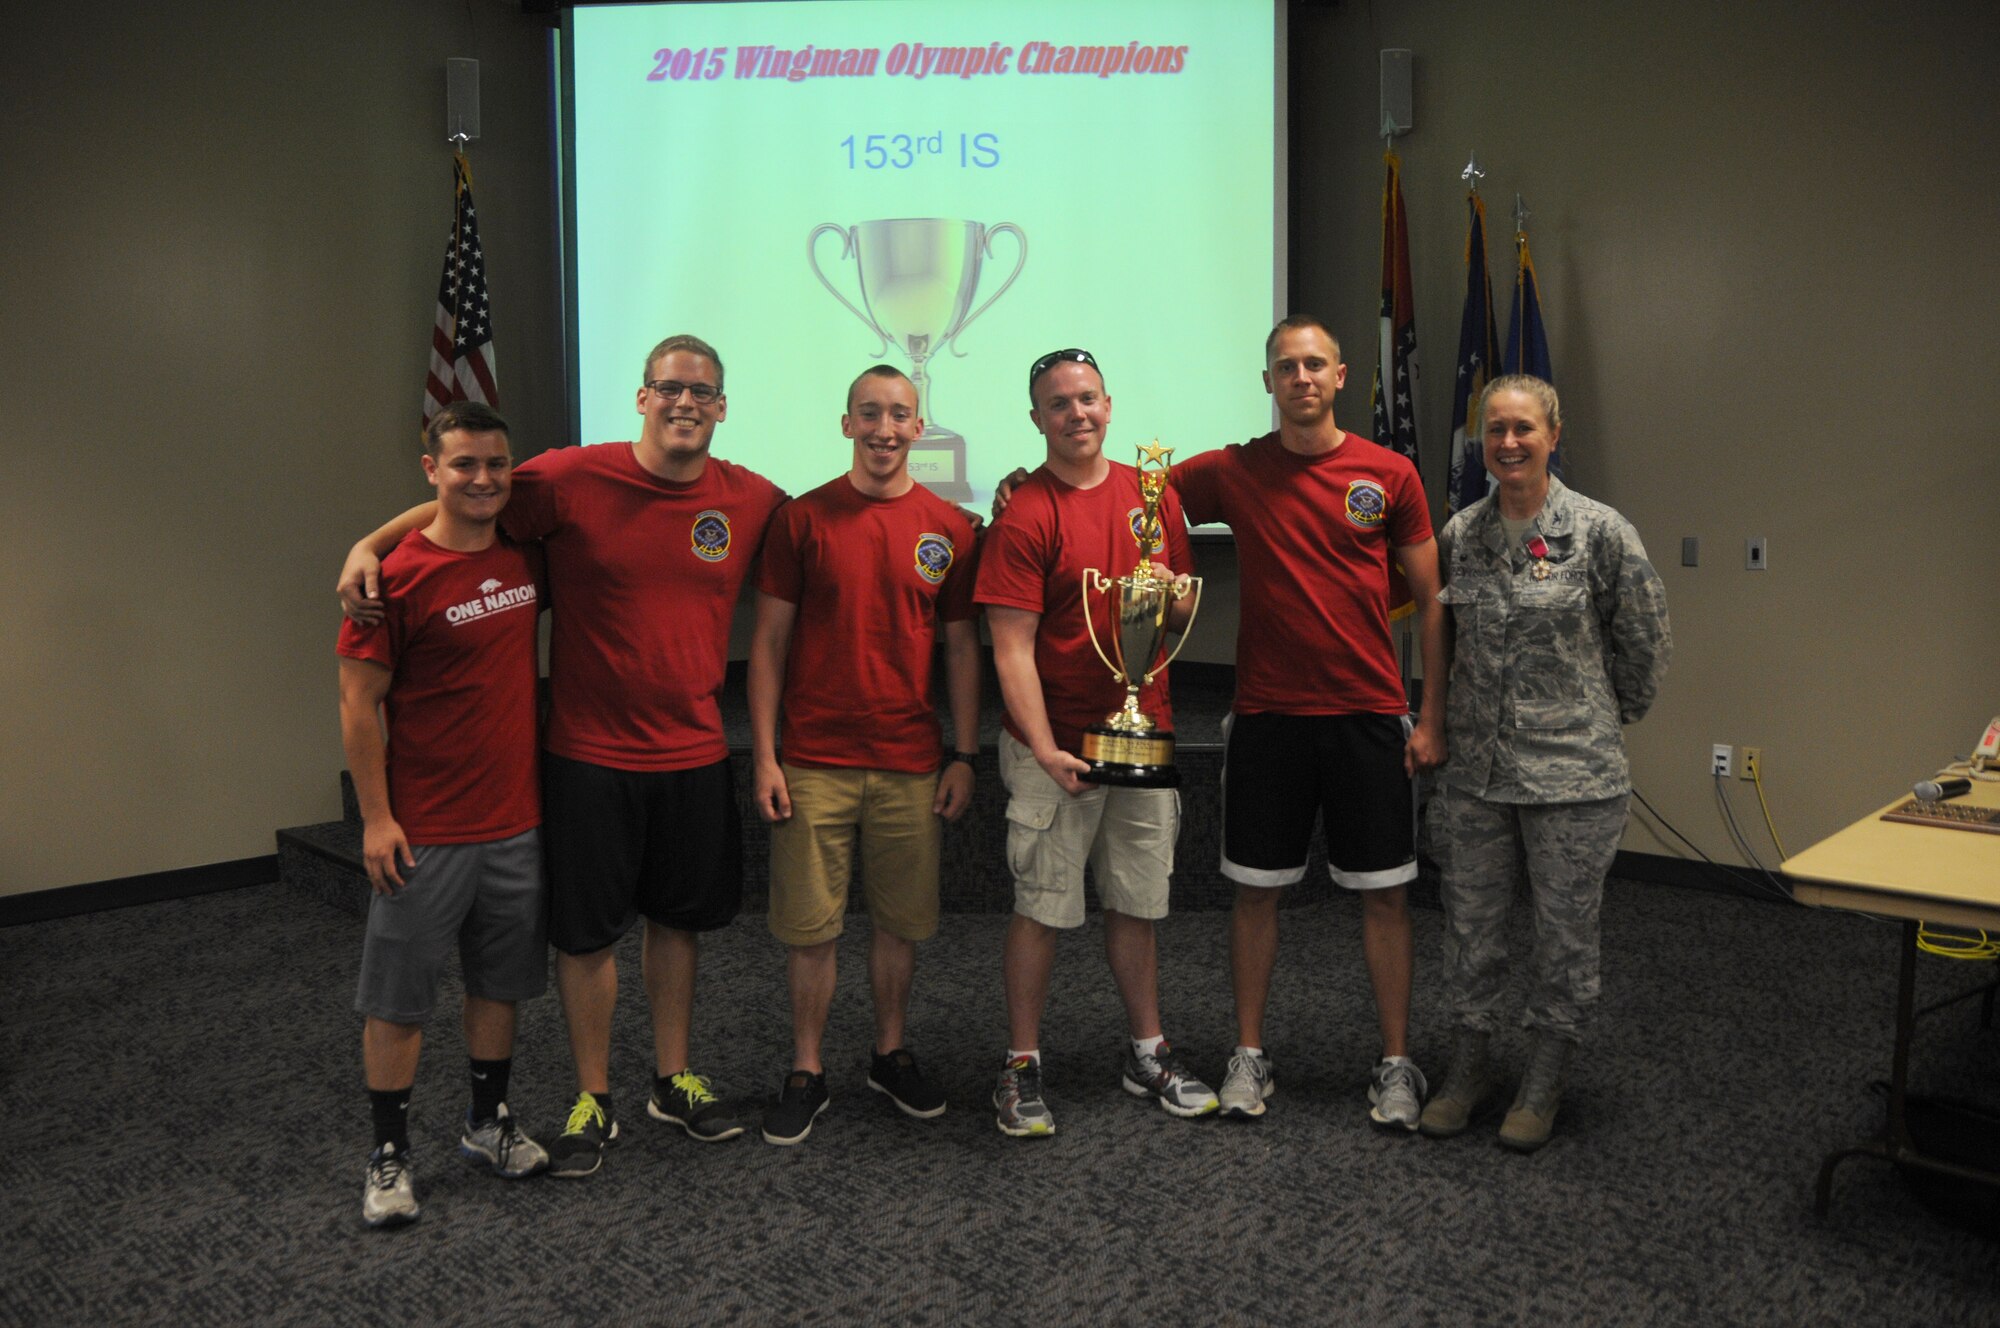 Col. Bobbi Doorenbos, 188th Wing commander, presents members of the 153rd Intelligence Squadron with the Wingman Olympics overall winner trophy June 7, 2015 at Ebbing Air National Guard Base, Fort Smith, Ark. The Wingman Olympics was held during Wingman Day and included a 1.5 mile run, volleyball, horseshoes, a mile relay, free-throw competition, golf pitching, a casting contest and a safety obstacle course. The 153rd IS attained 1st place by cumulatively scoring the most points in the Wingman Olympic events. (U.S. Air National Guard photo by Senior Airman Cody Martin/Released) 